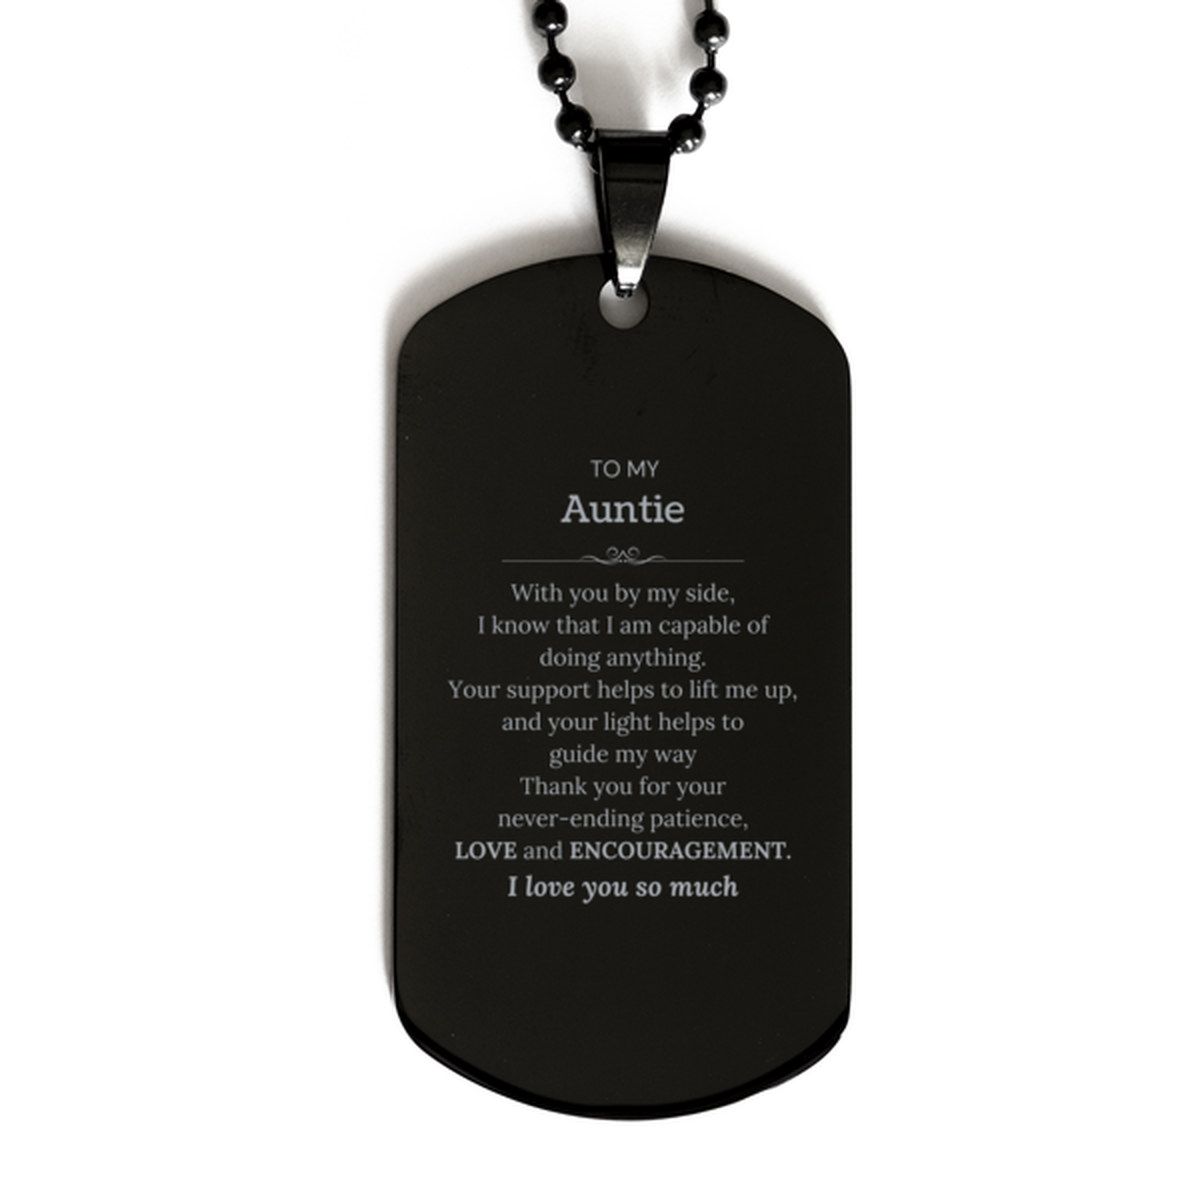 Appreciation Auntie Black Dog Tag Gifts, To My Auntie Birthday Christmas Wedding Keepsake Gifts for Auntie With you by my side, I know that I am capable of doing anything. I love you so much